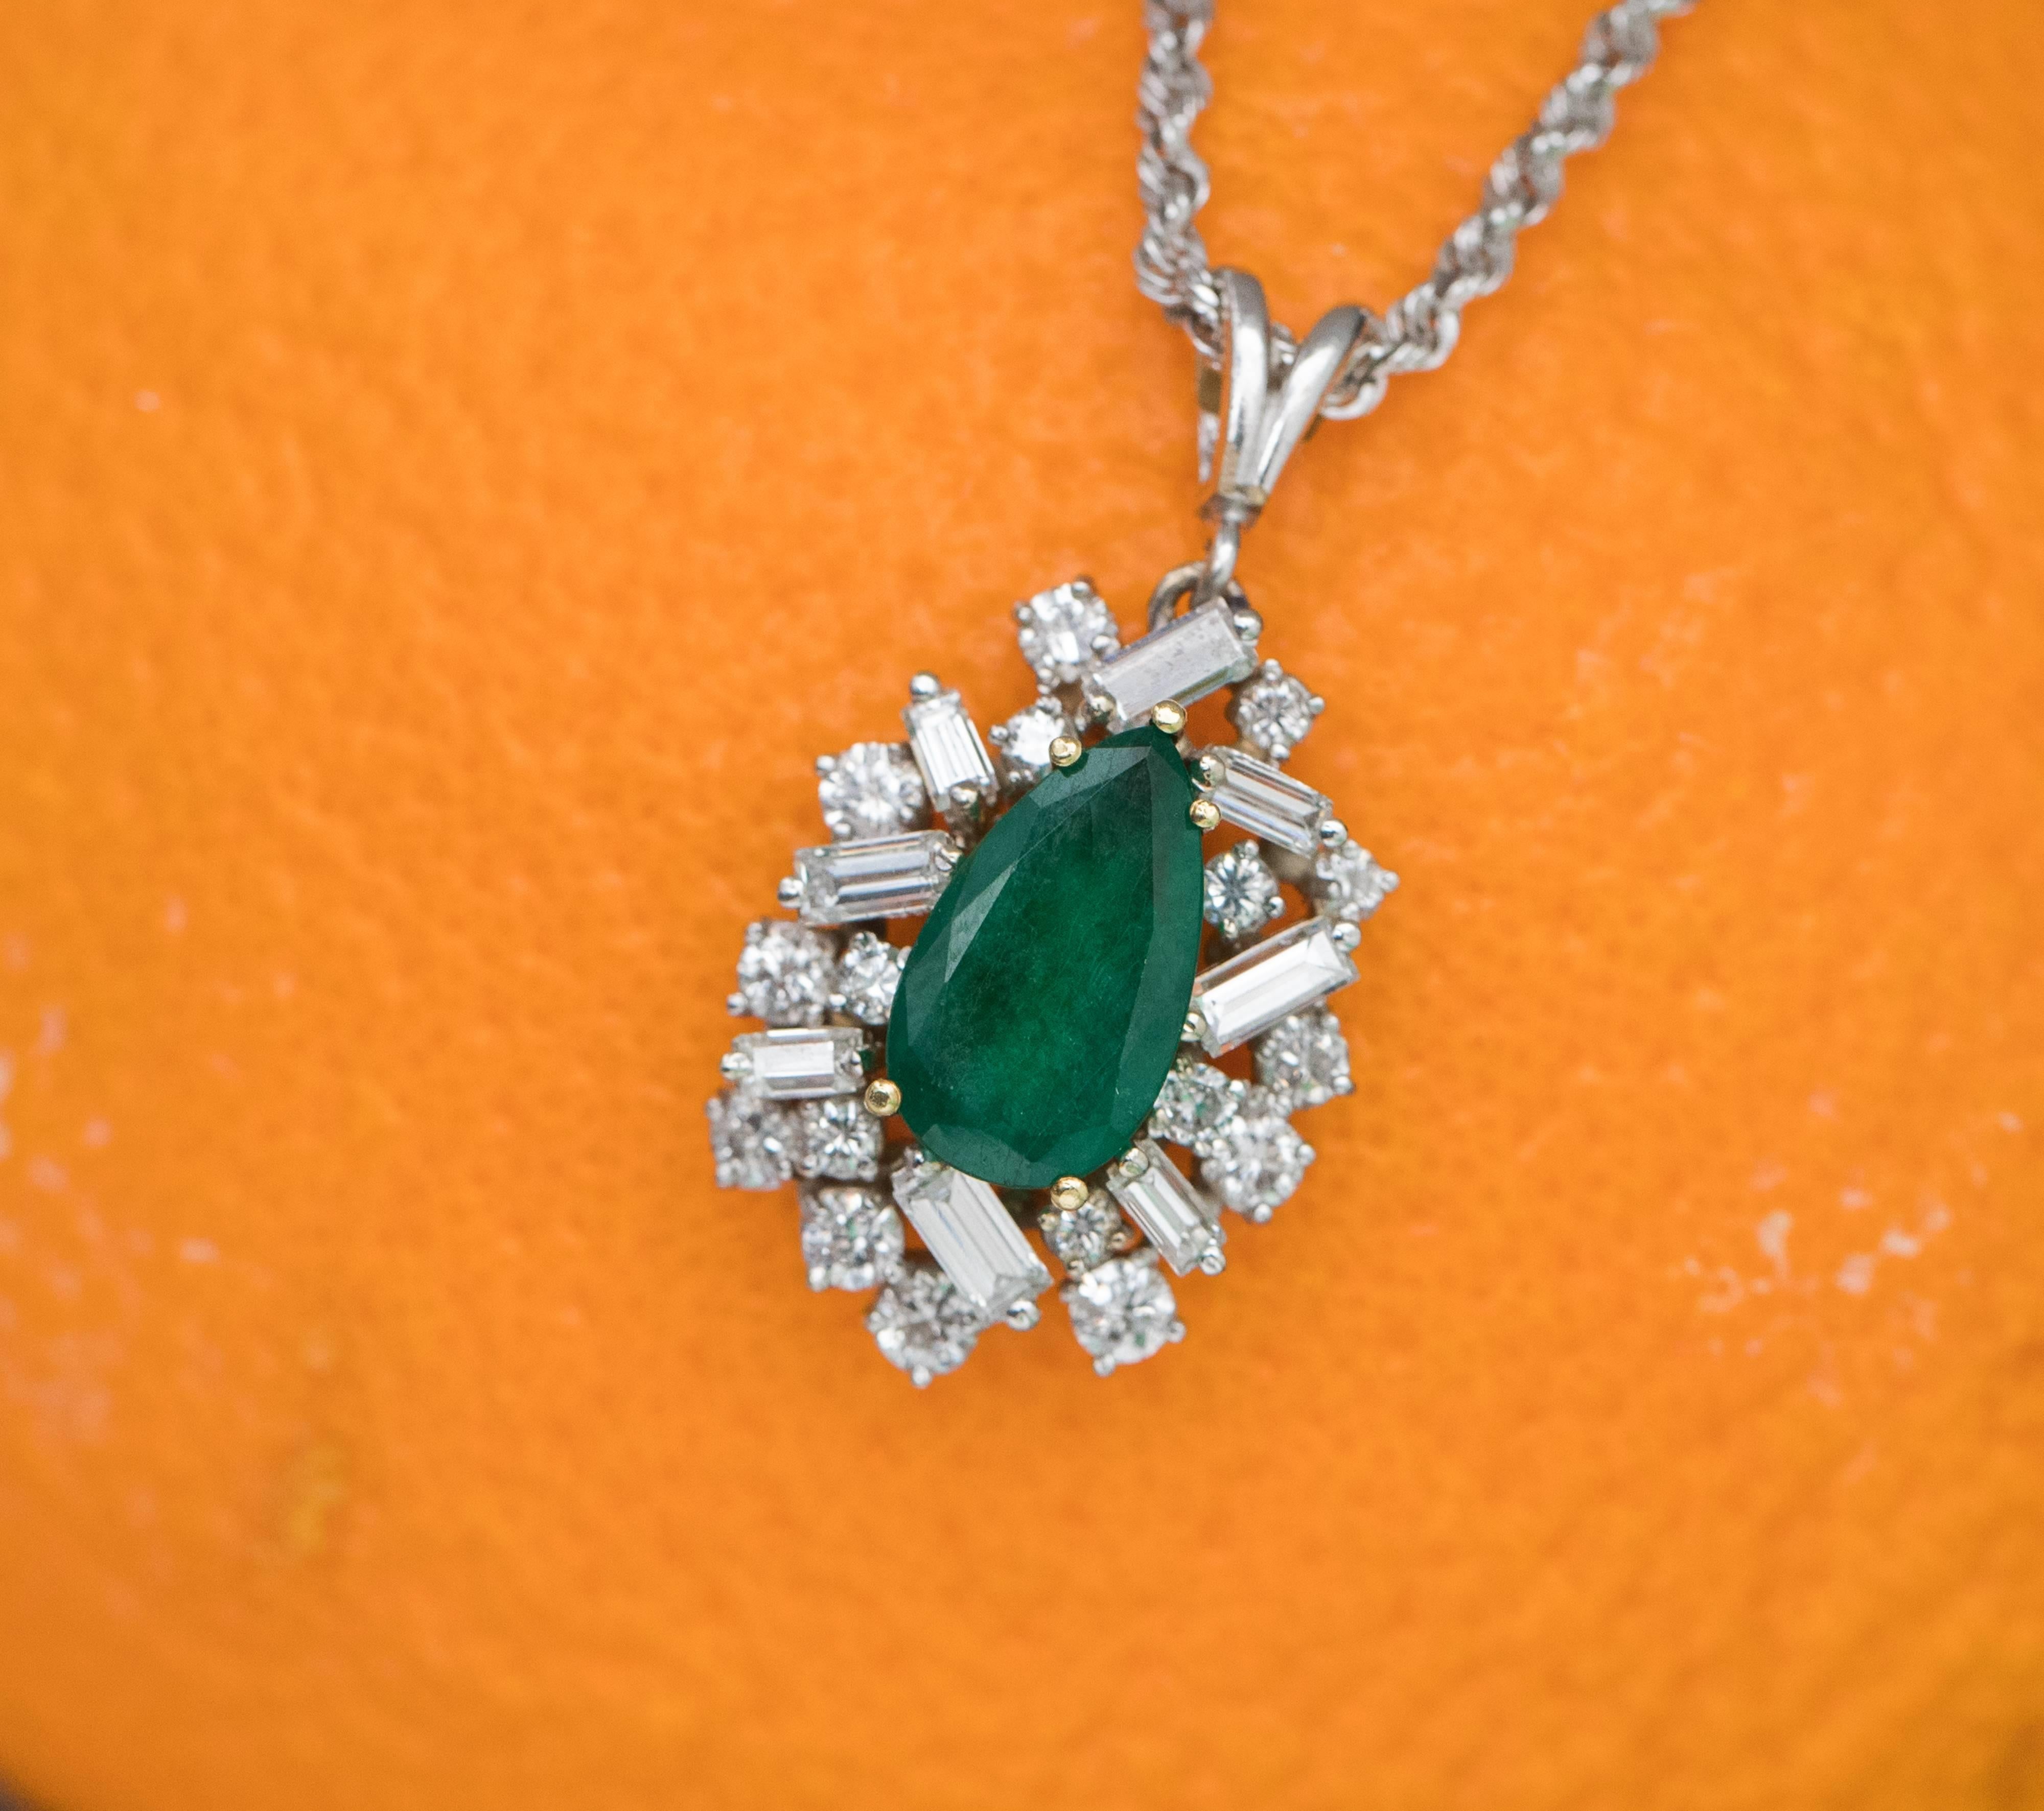 1960s Retro Emerald with Diamonds and 14K White Gold Necklace. 
Features a 2.5 carat Tear Drop Shaped, Dark Forest Green Emerald mounted in 14K Yellow Gold. 
Baguette and Round Brilliant Diamonds set in 14K White Gold surround the Emerald. 
A double